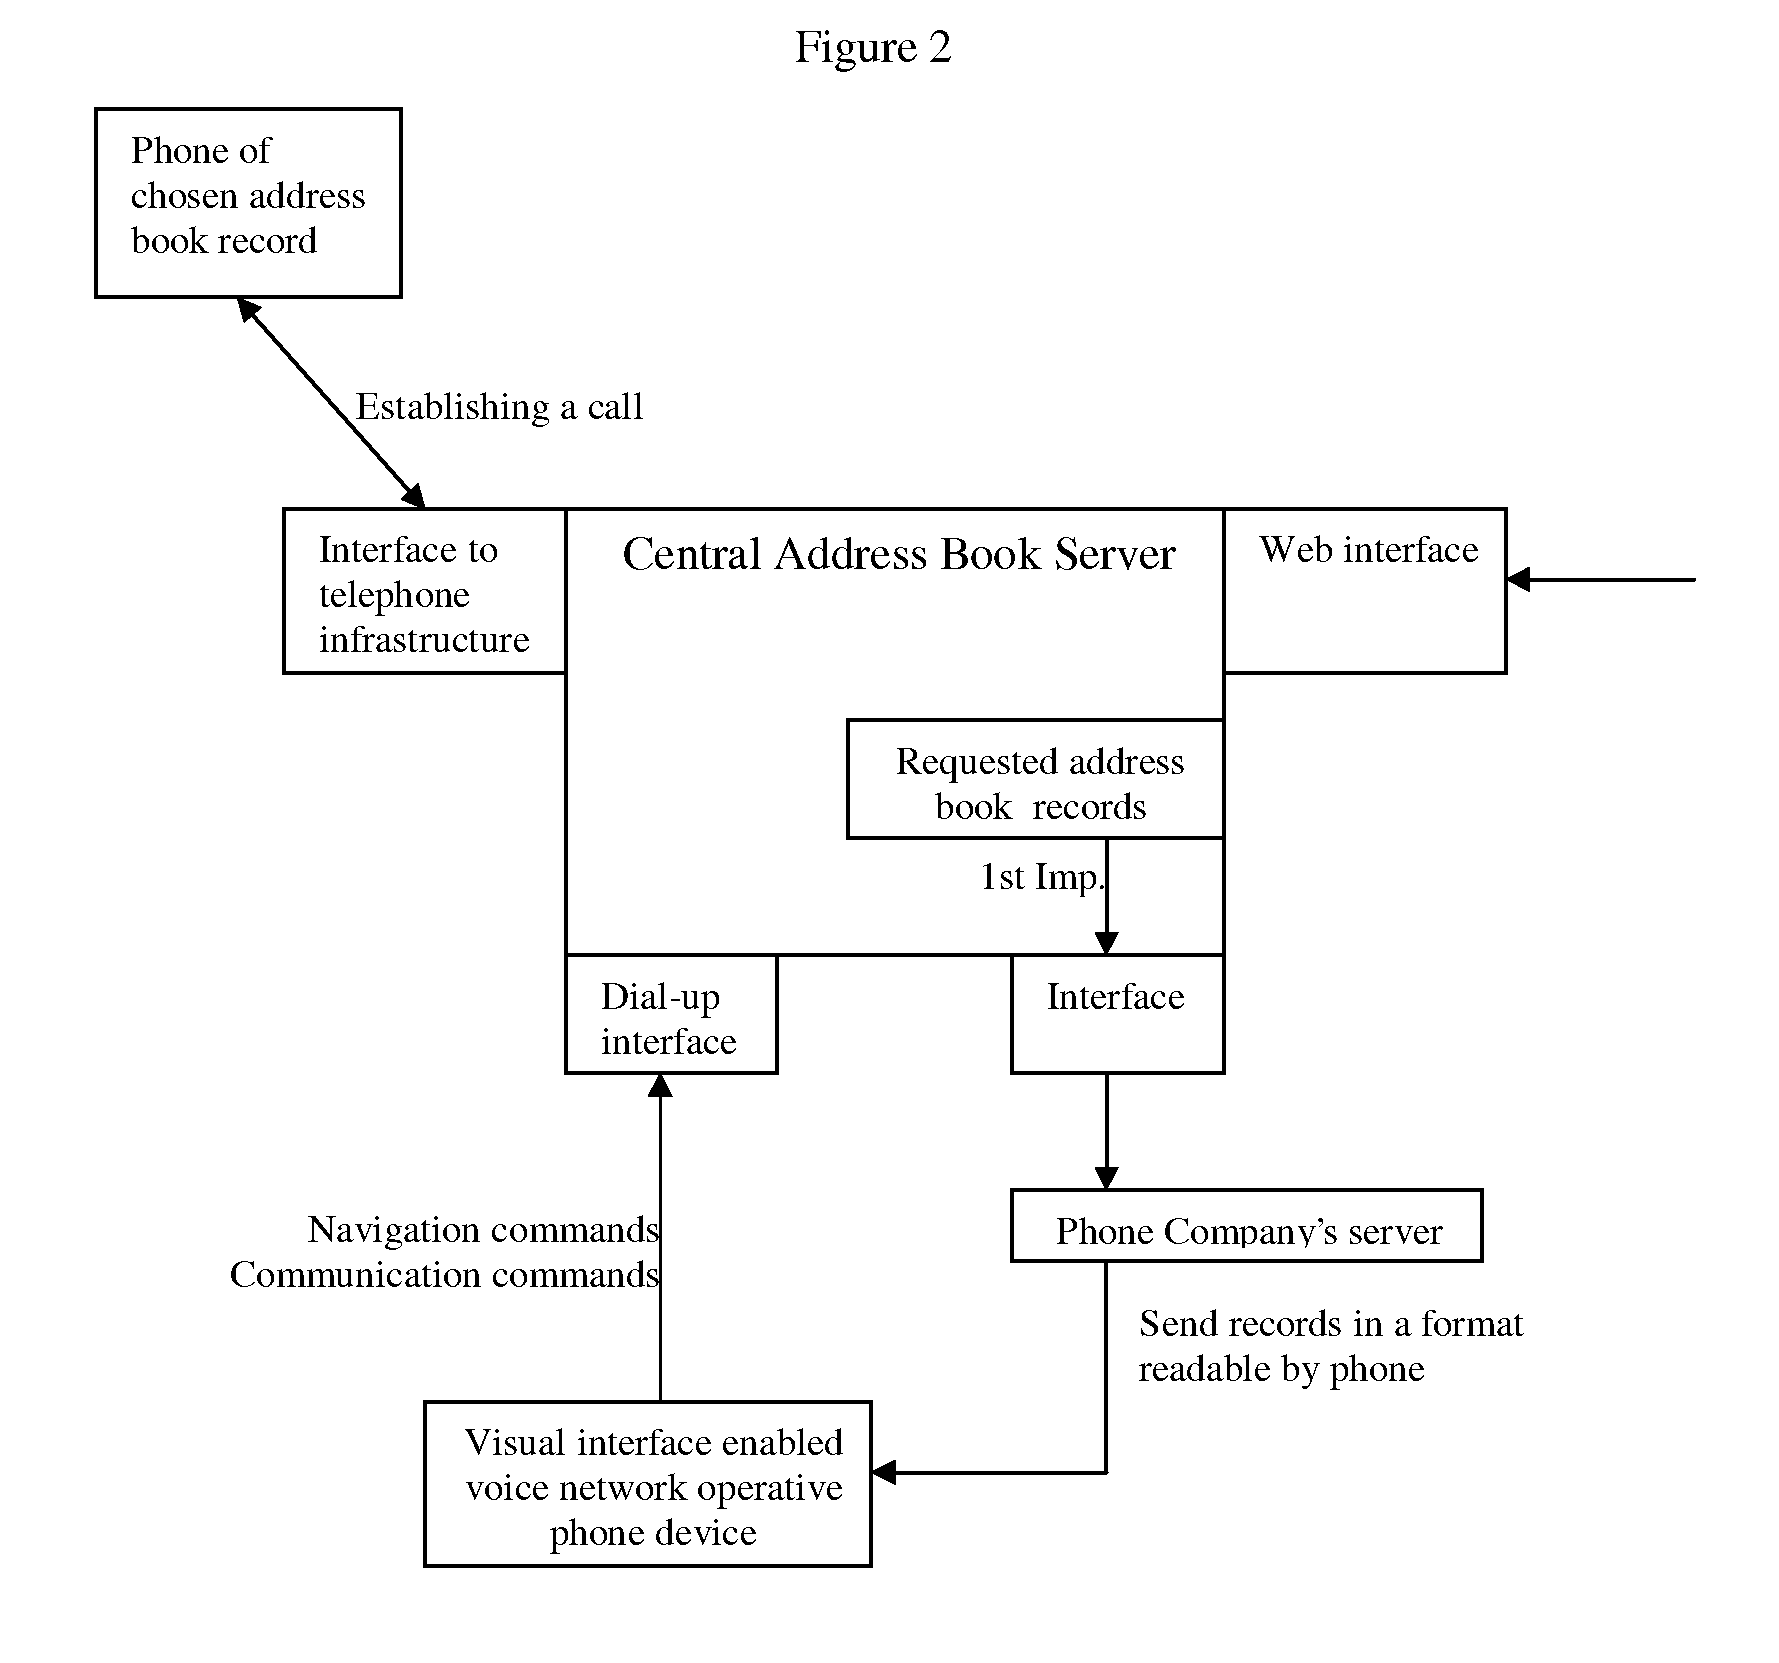 Method for Interacting Via an Internet Accessible Address-Book Using a Visual Interface Phone Device